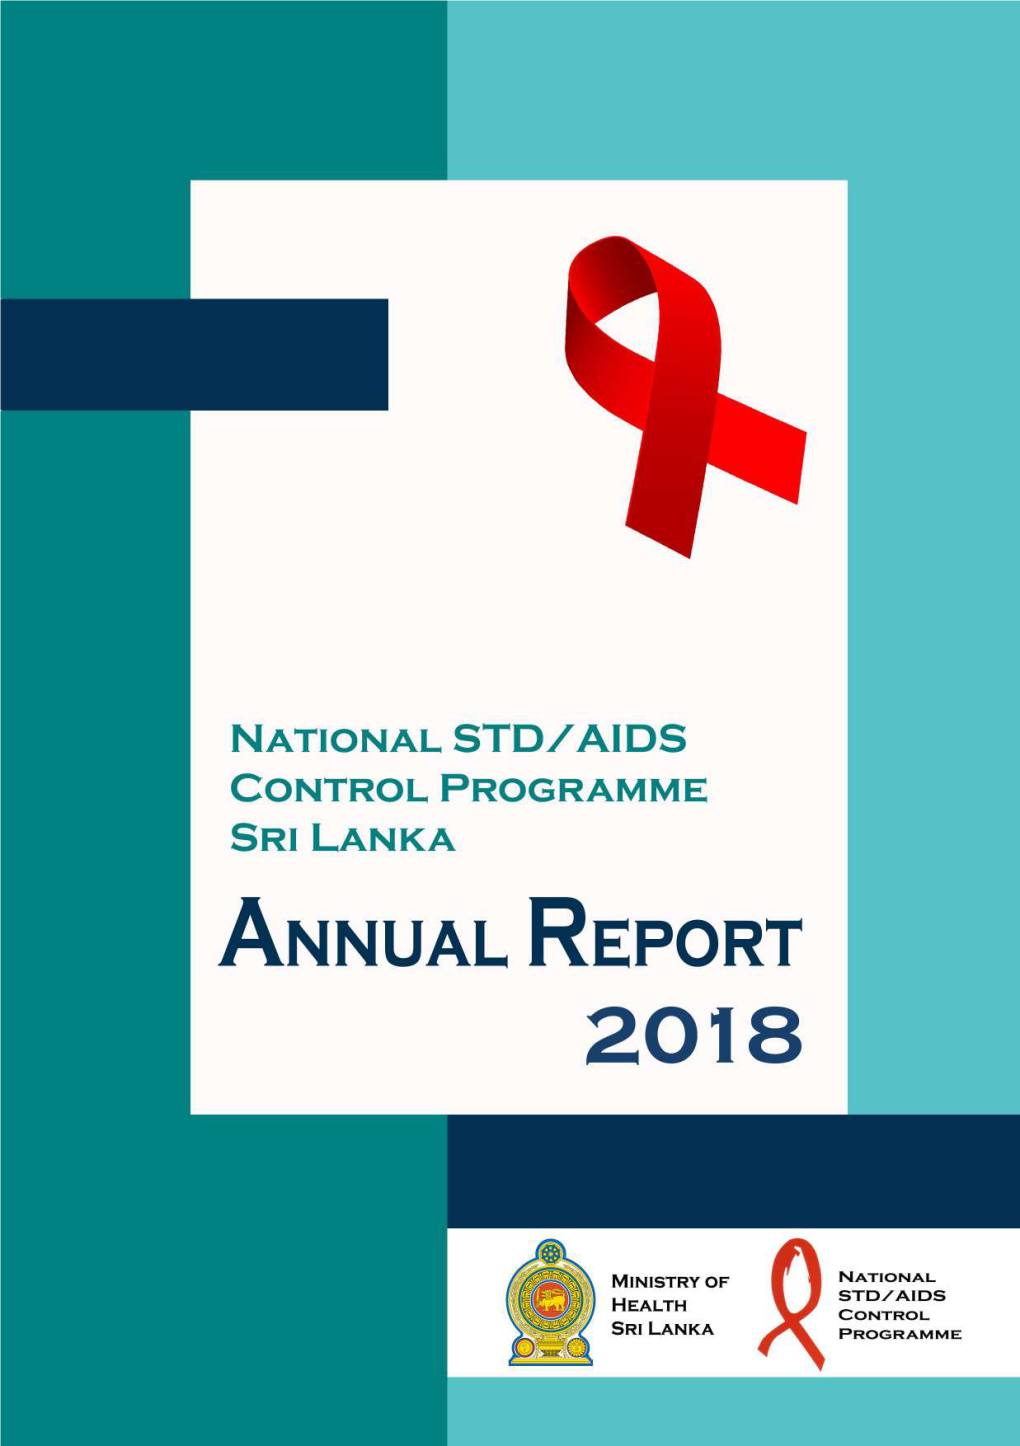 Annual Report 2018. National STD/AIDS Control